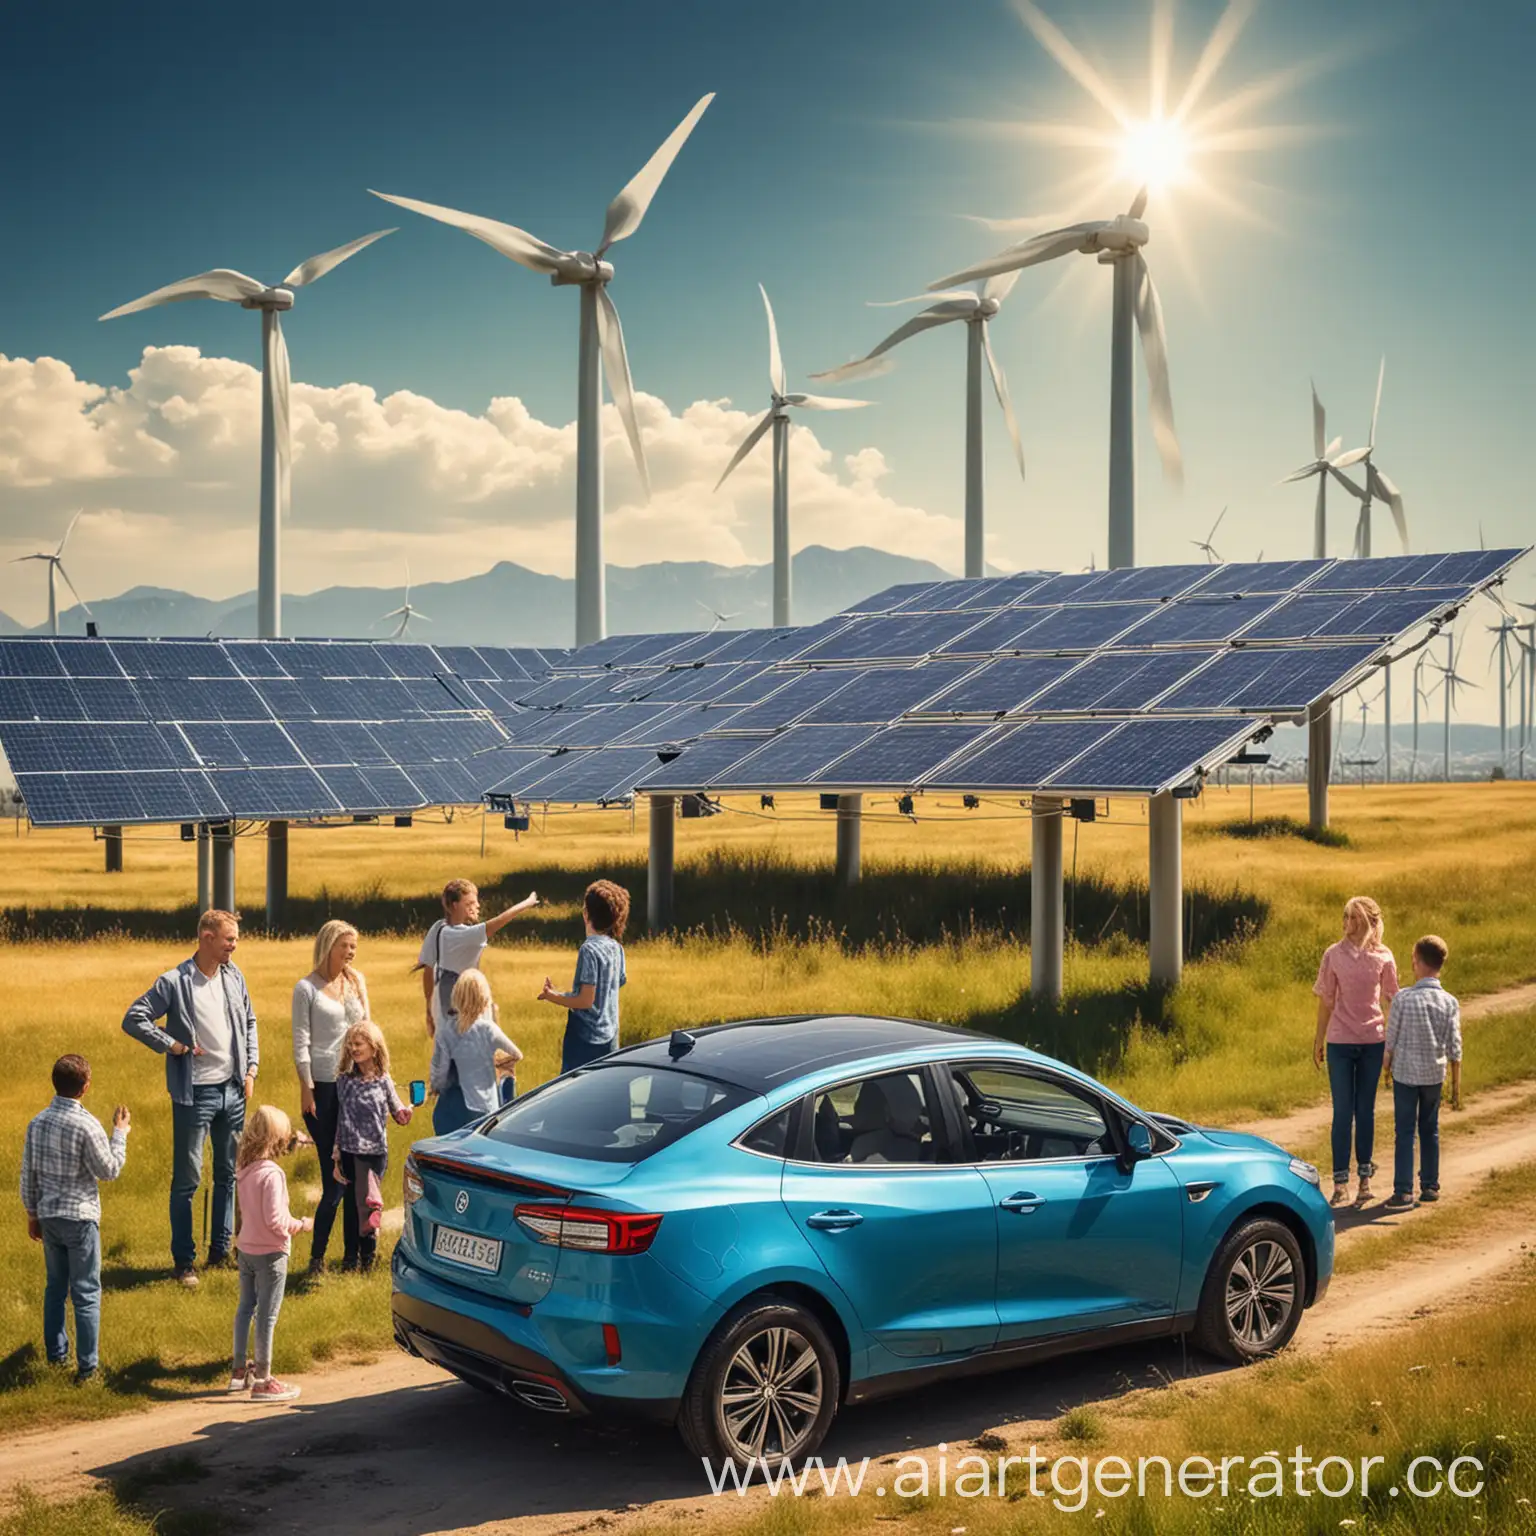 Community-Bonding-with-Sustainable-Energy-Solar-Panels-Electric-Cars-and-Wind-Turbines